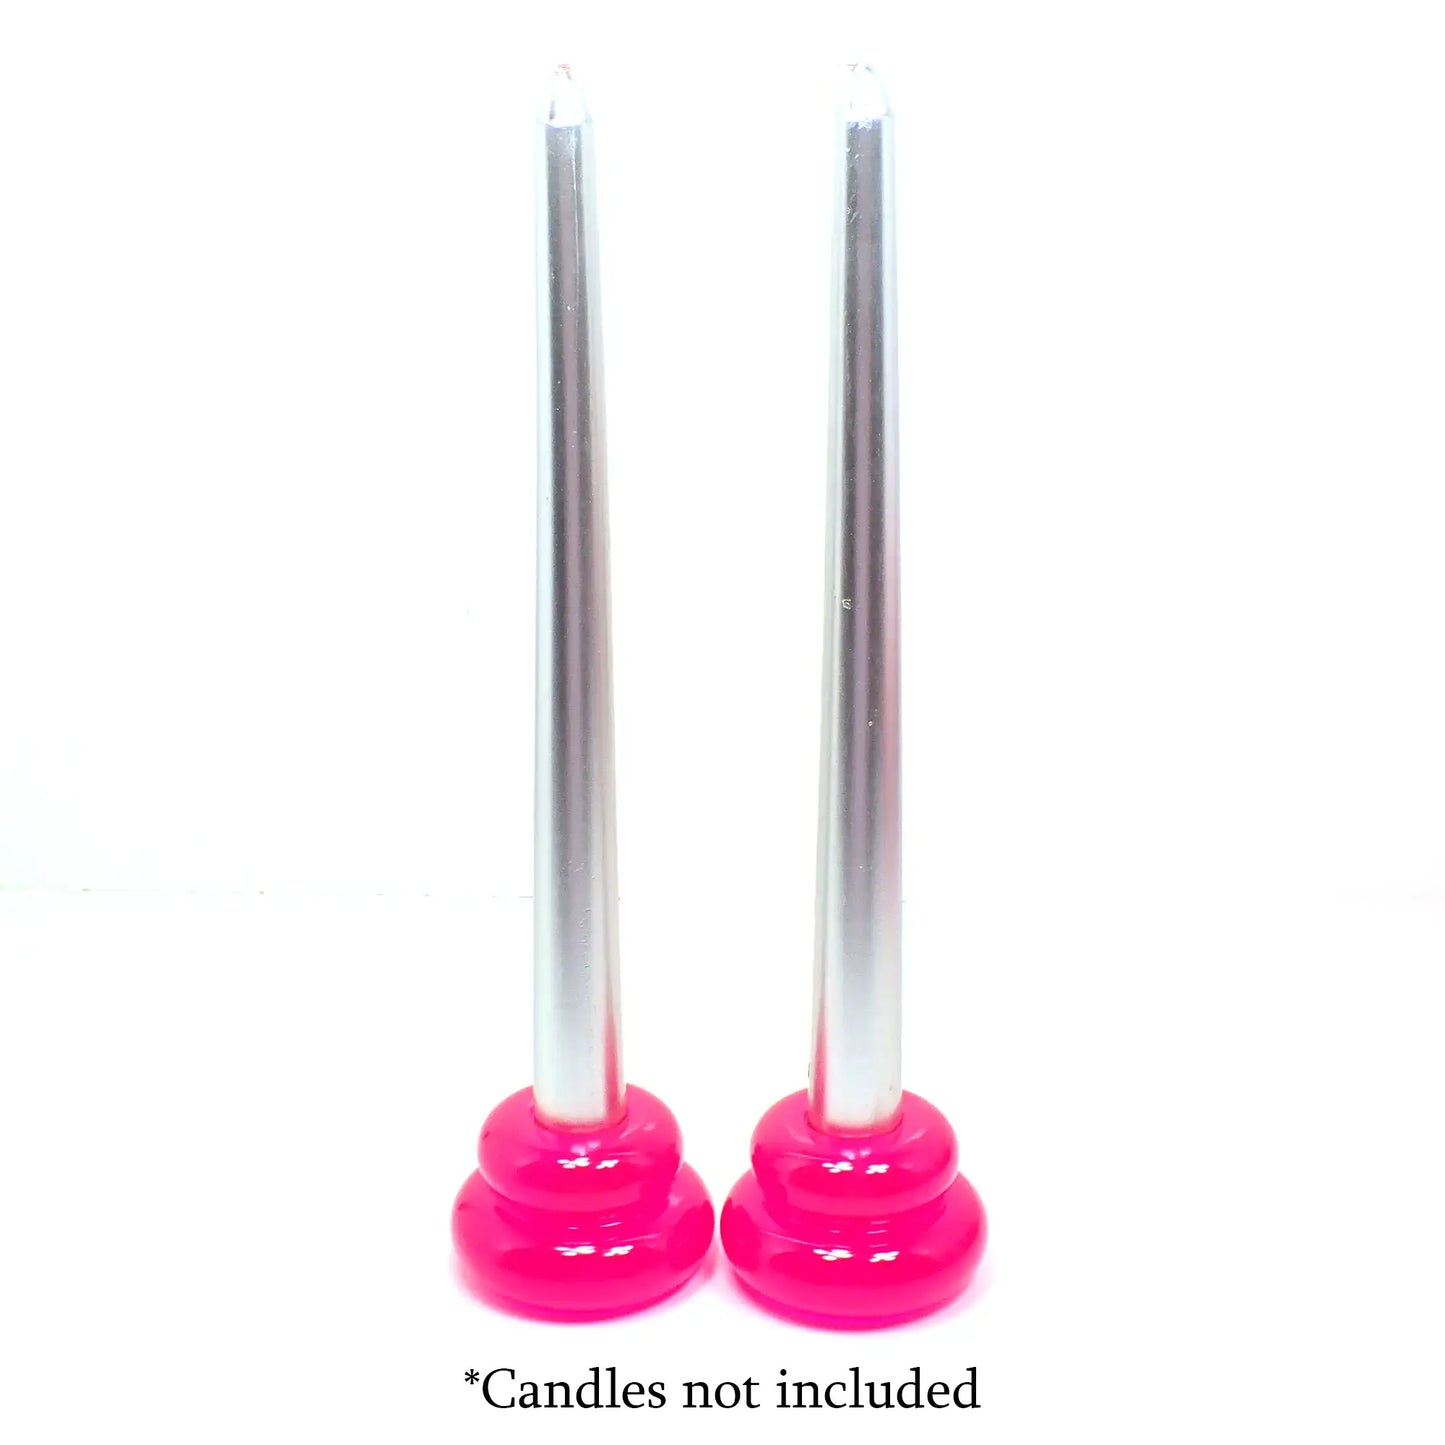 Photo showing how the handmade puffy double ring candlestick holders look with candles in them. The candles being shown are silver in color and the candlestick holders are bright neon pink. At the bottom are the words "Candles not included."